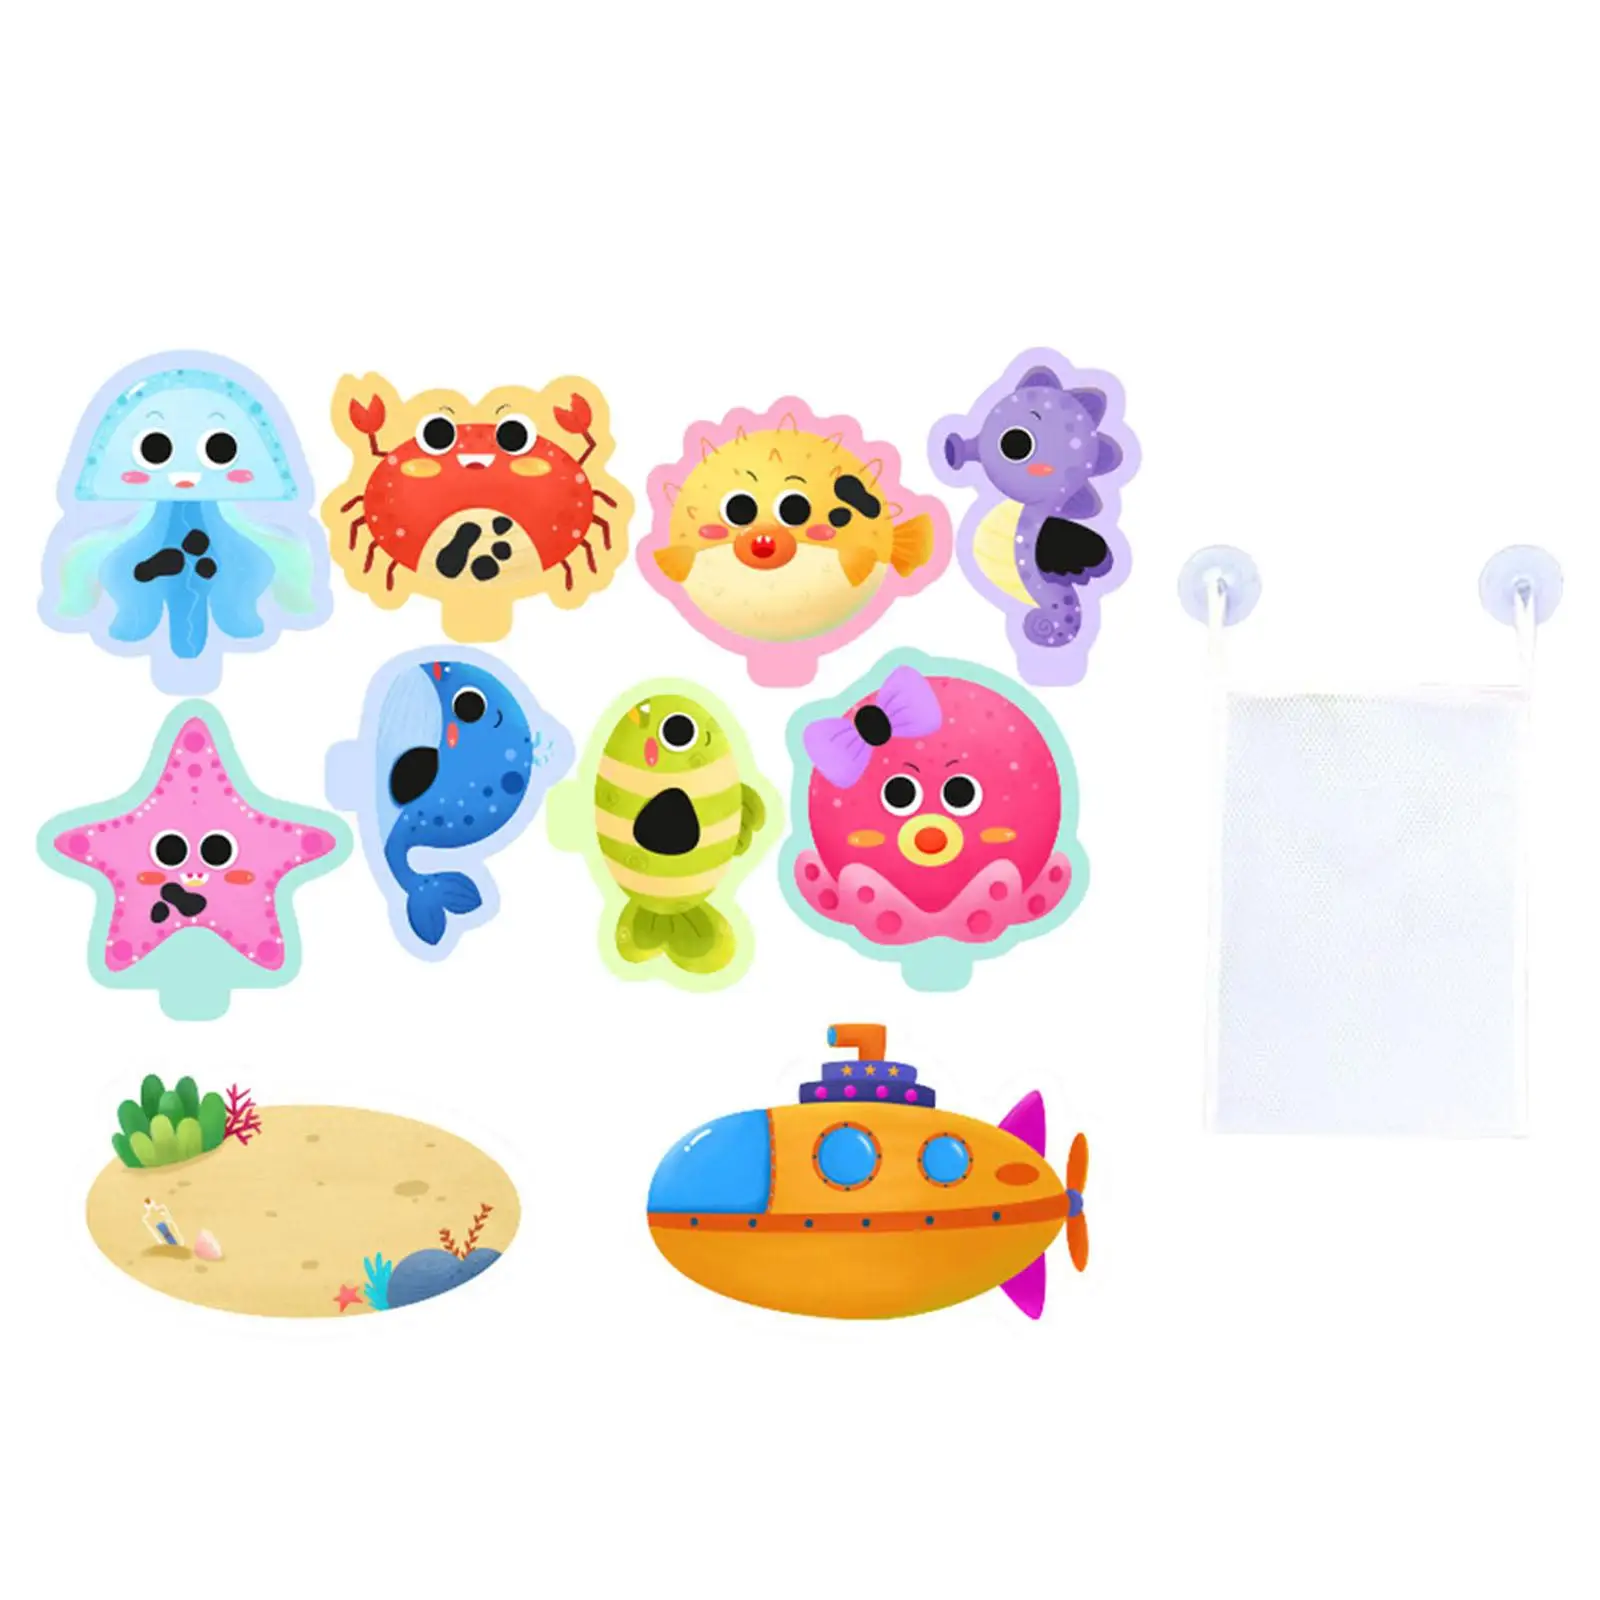 10Pcs Child Early Educational Wall Stickers with Storage Bag Preschool Game Bathroom Stickers for Toddler Children Girls Boys